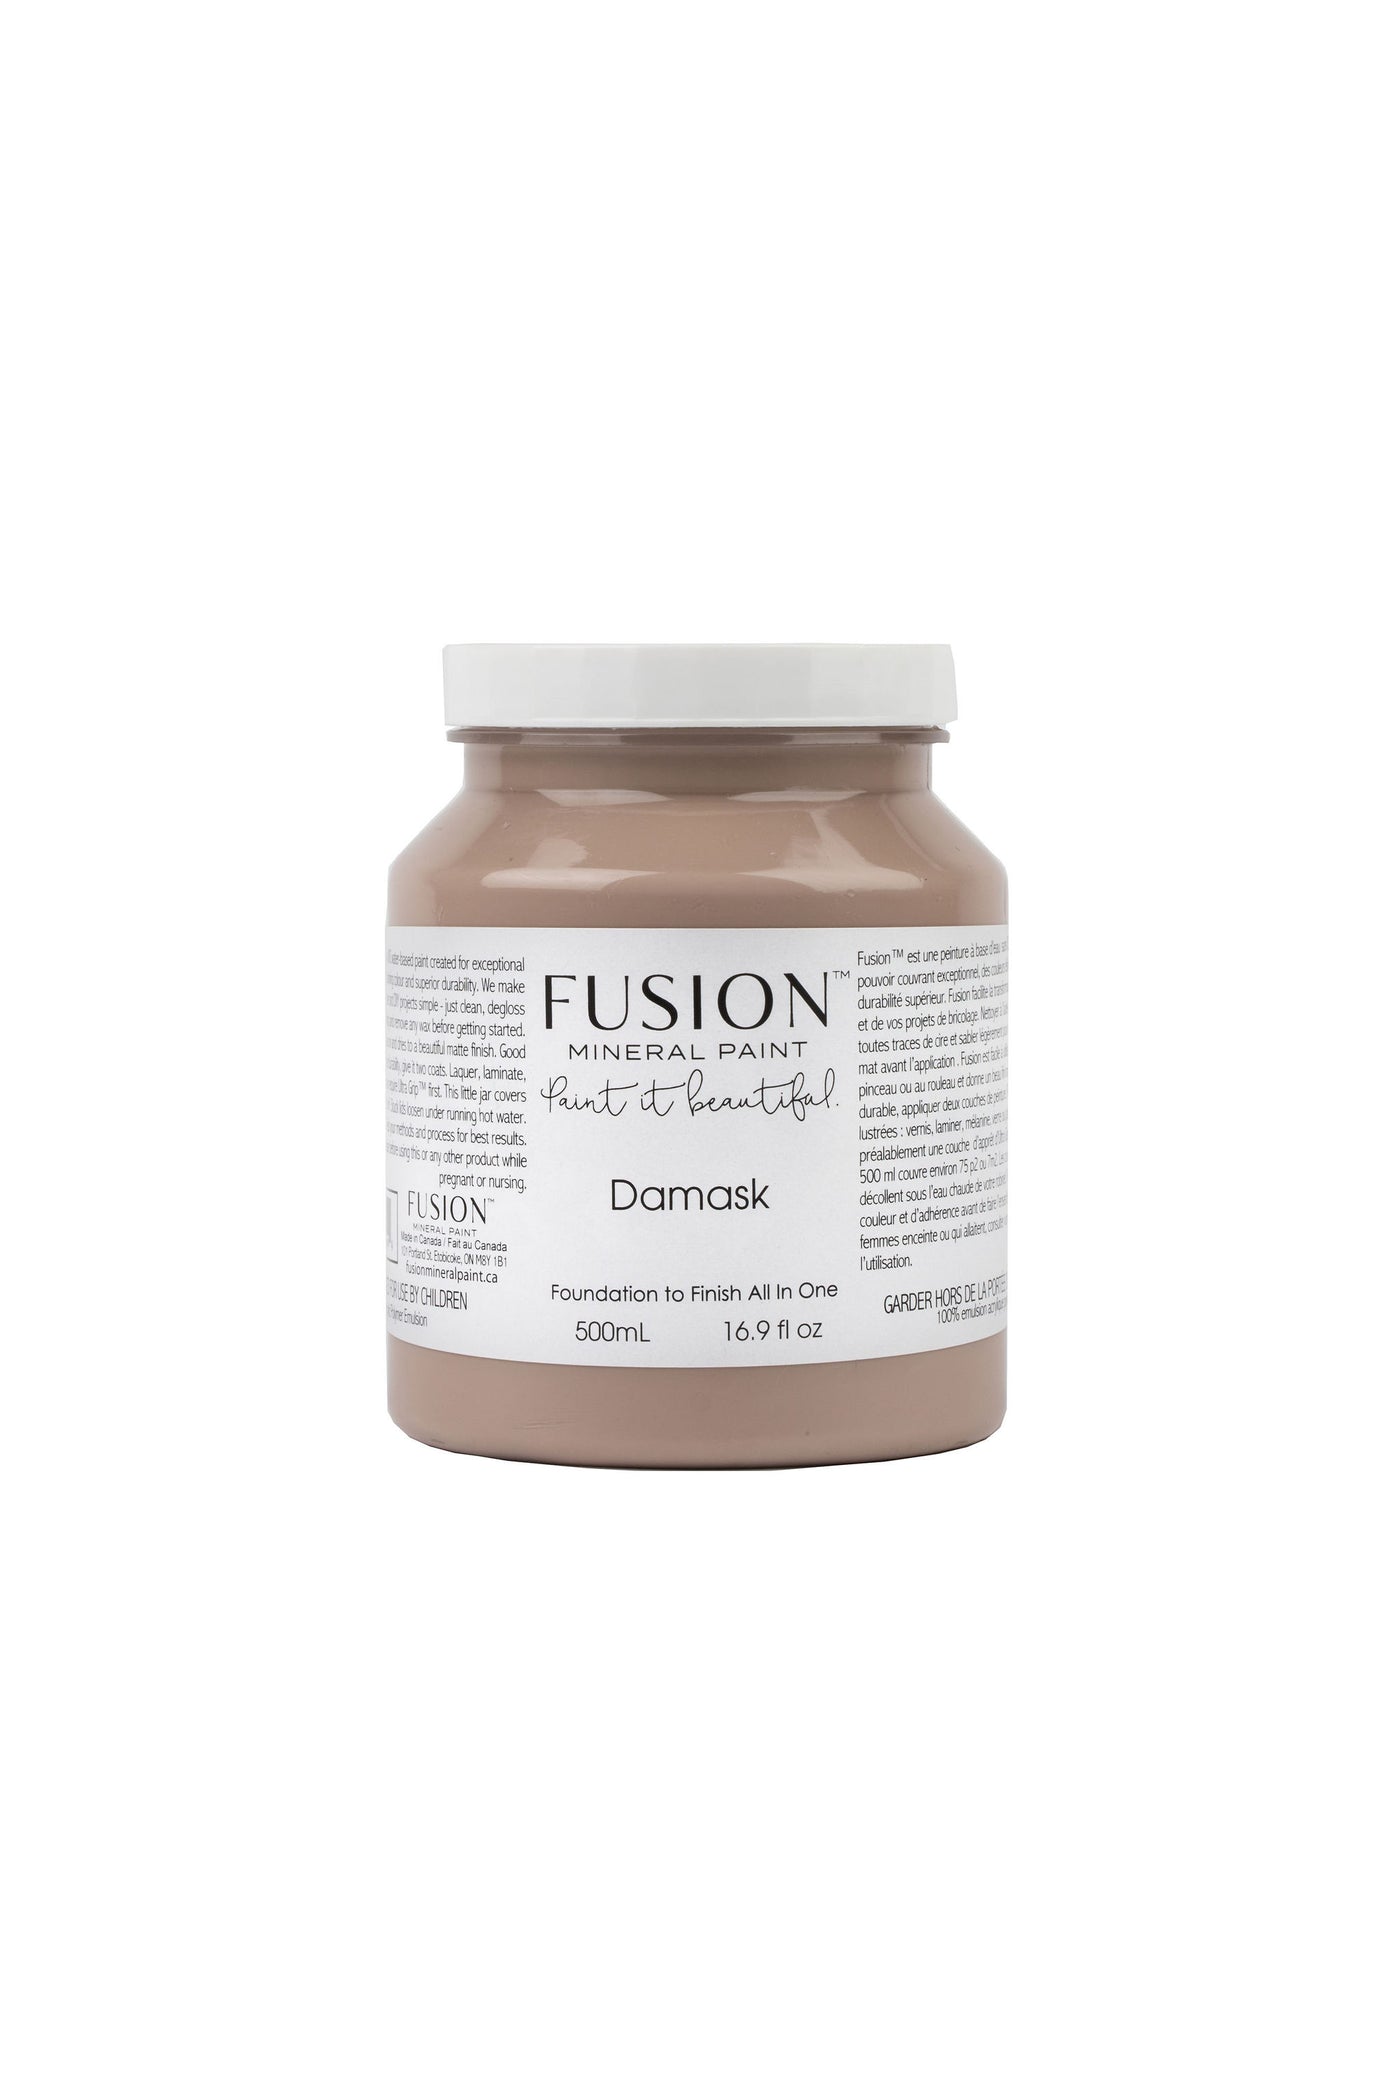 DAMASK - FUSION MINERAL PAINT